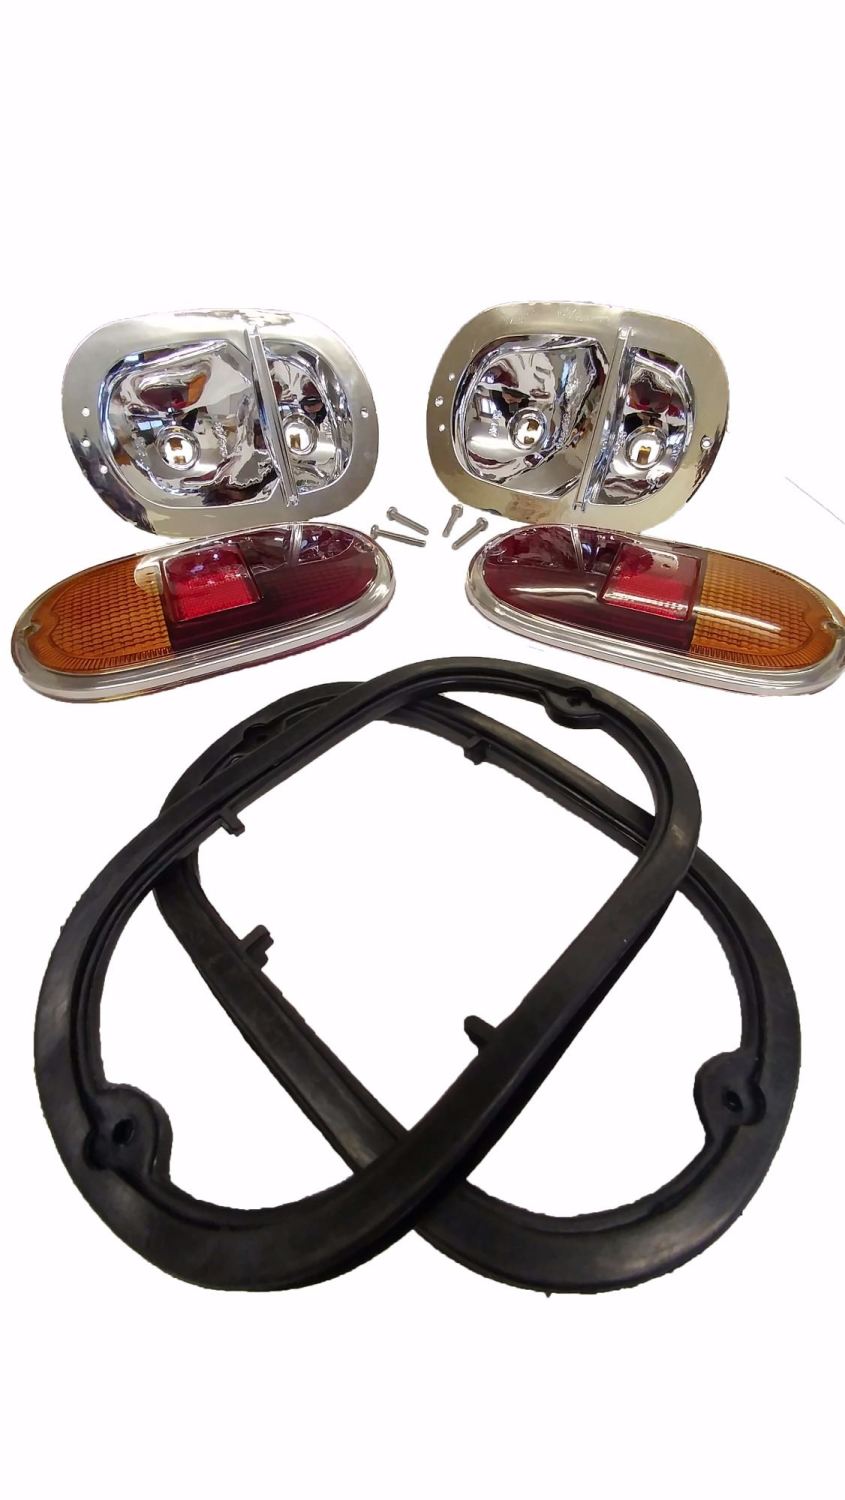 Complete Rear Lights, Top Quality, Pair 62-71.   211-945-237BQKIT